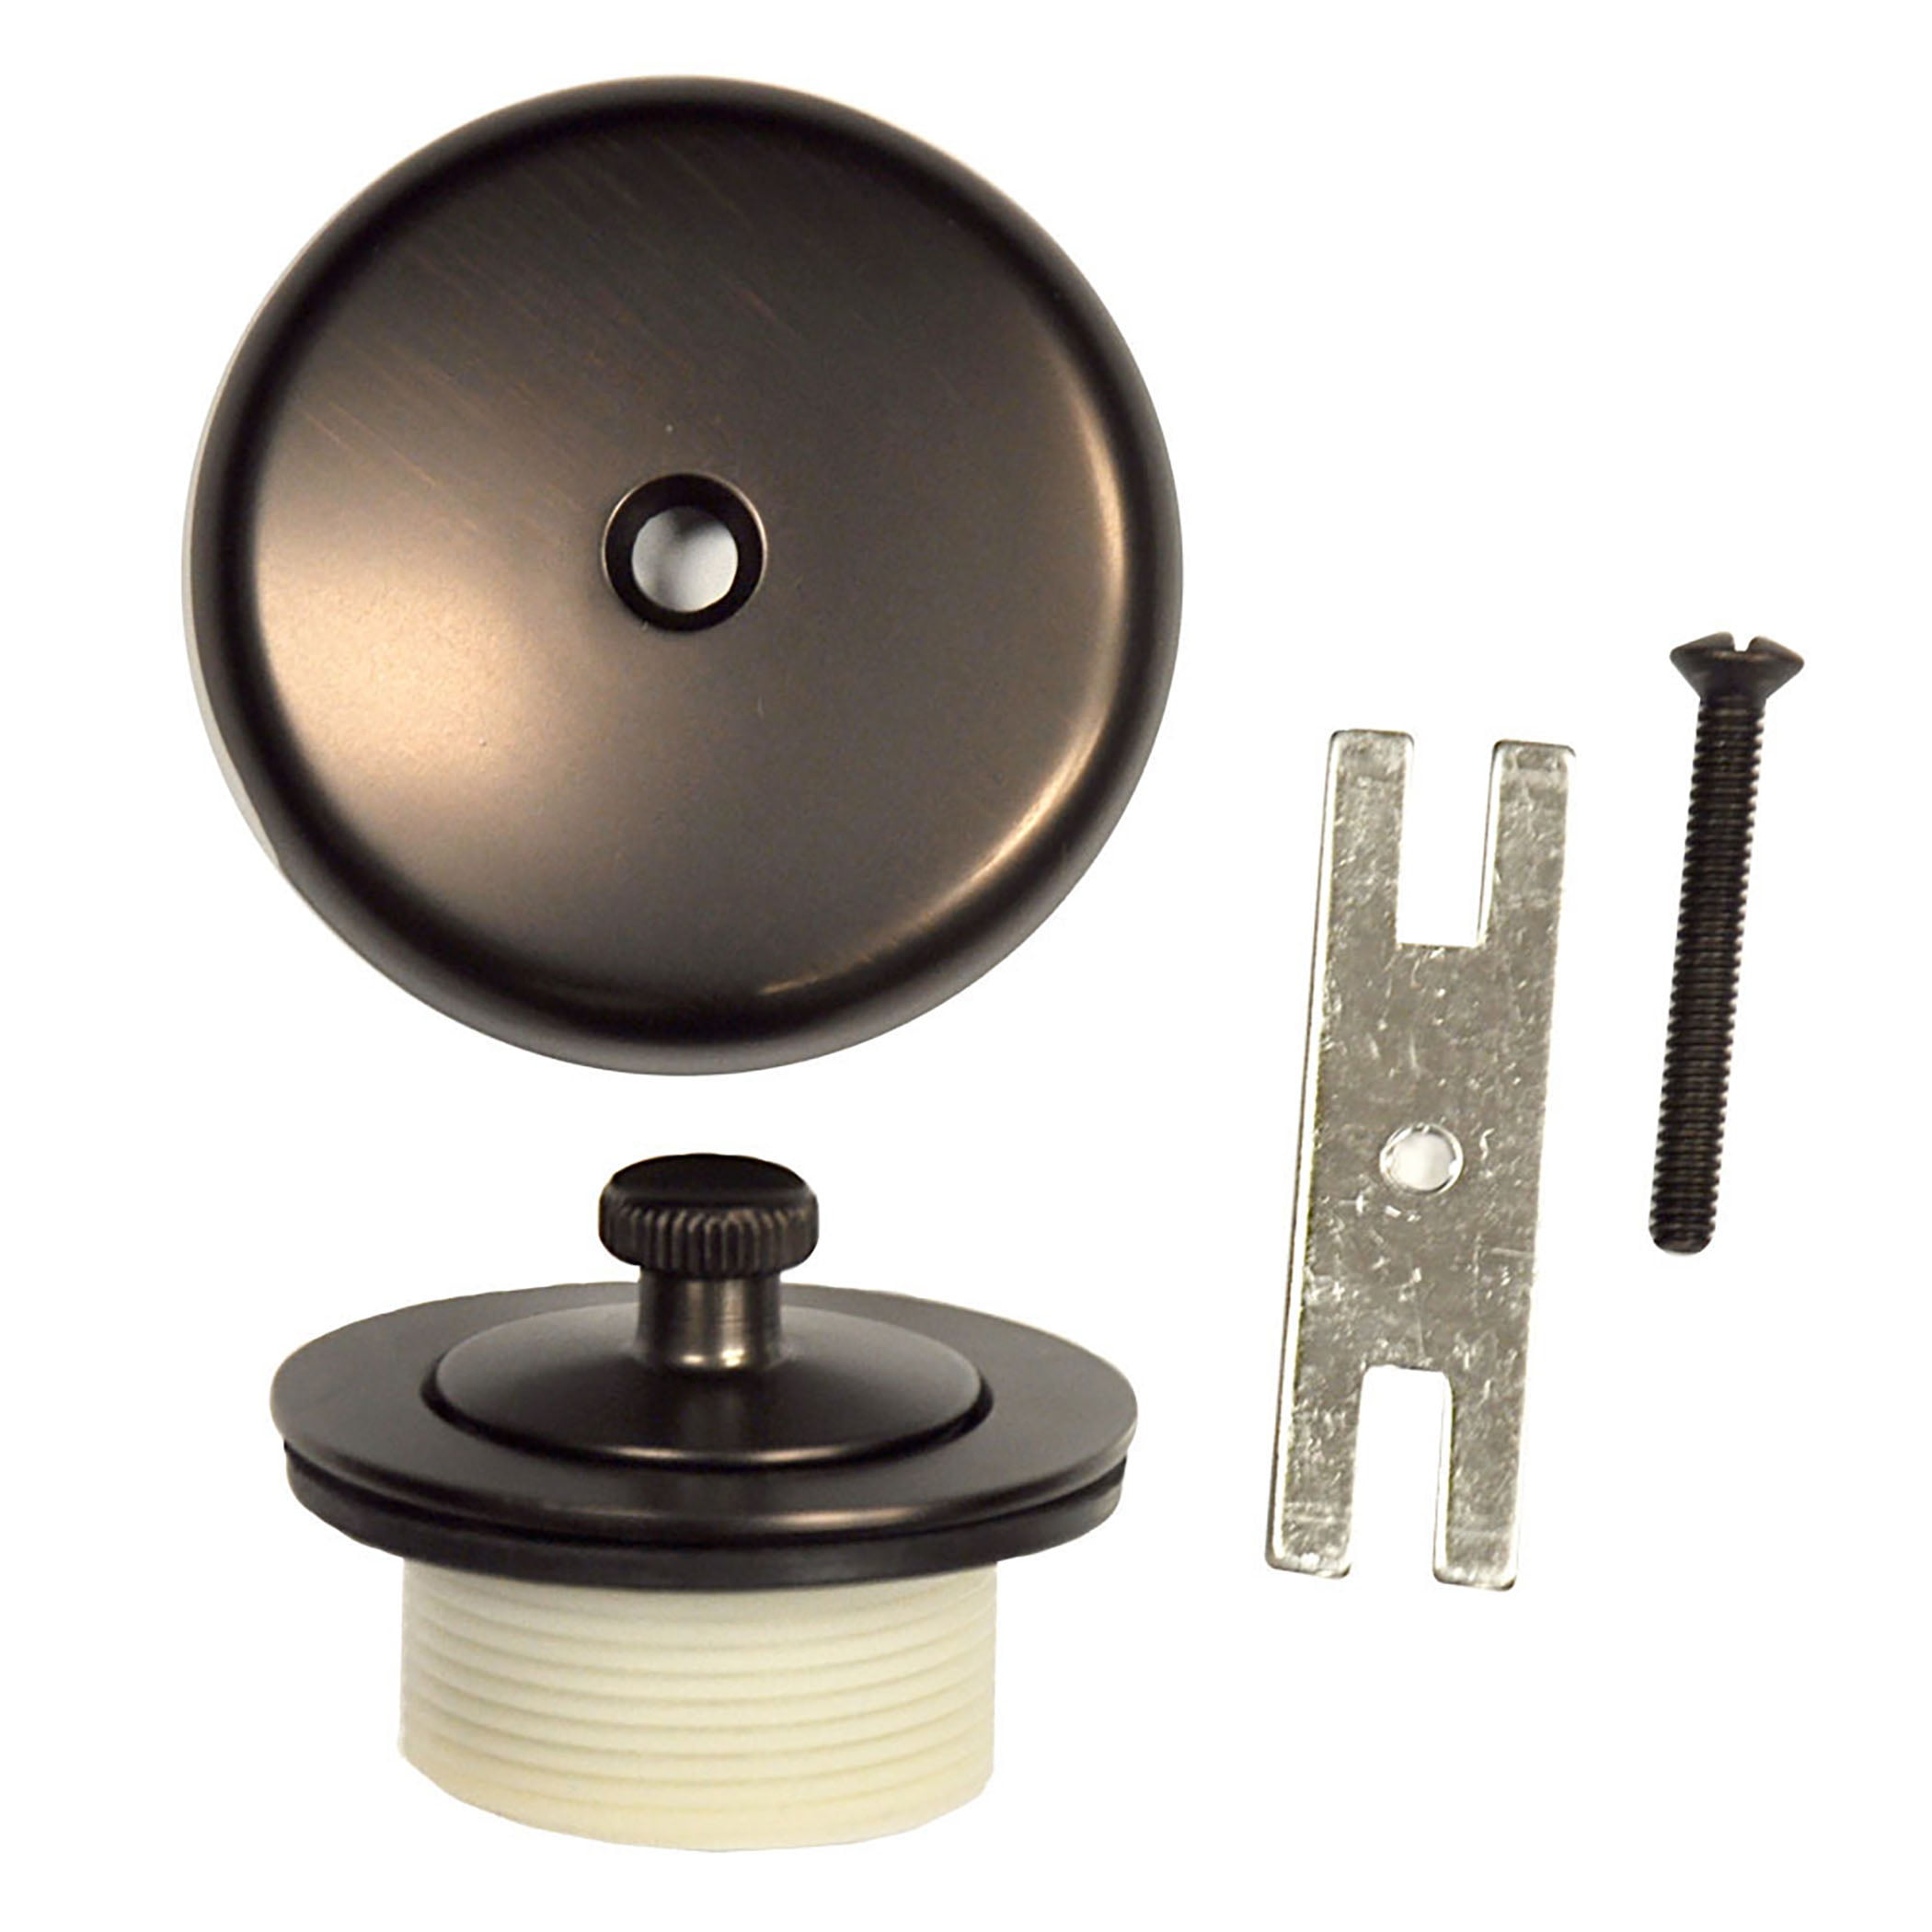 Danco Polished Brass Overflow Plate and Lift and Turn Stopper Kit  #89238 